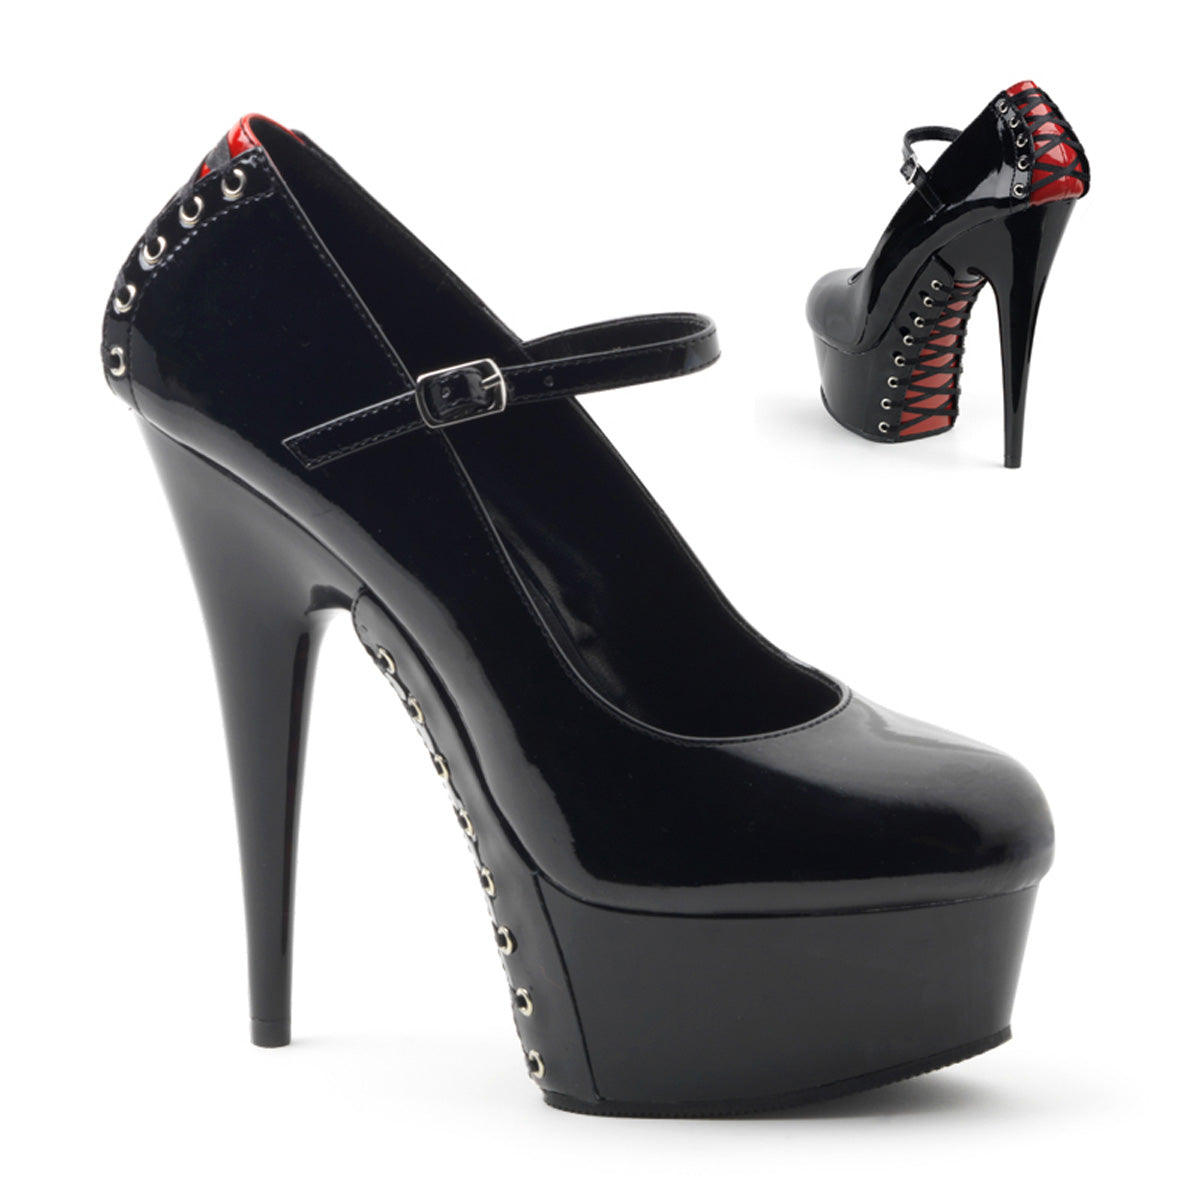 red mary jane platform shoes